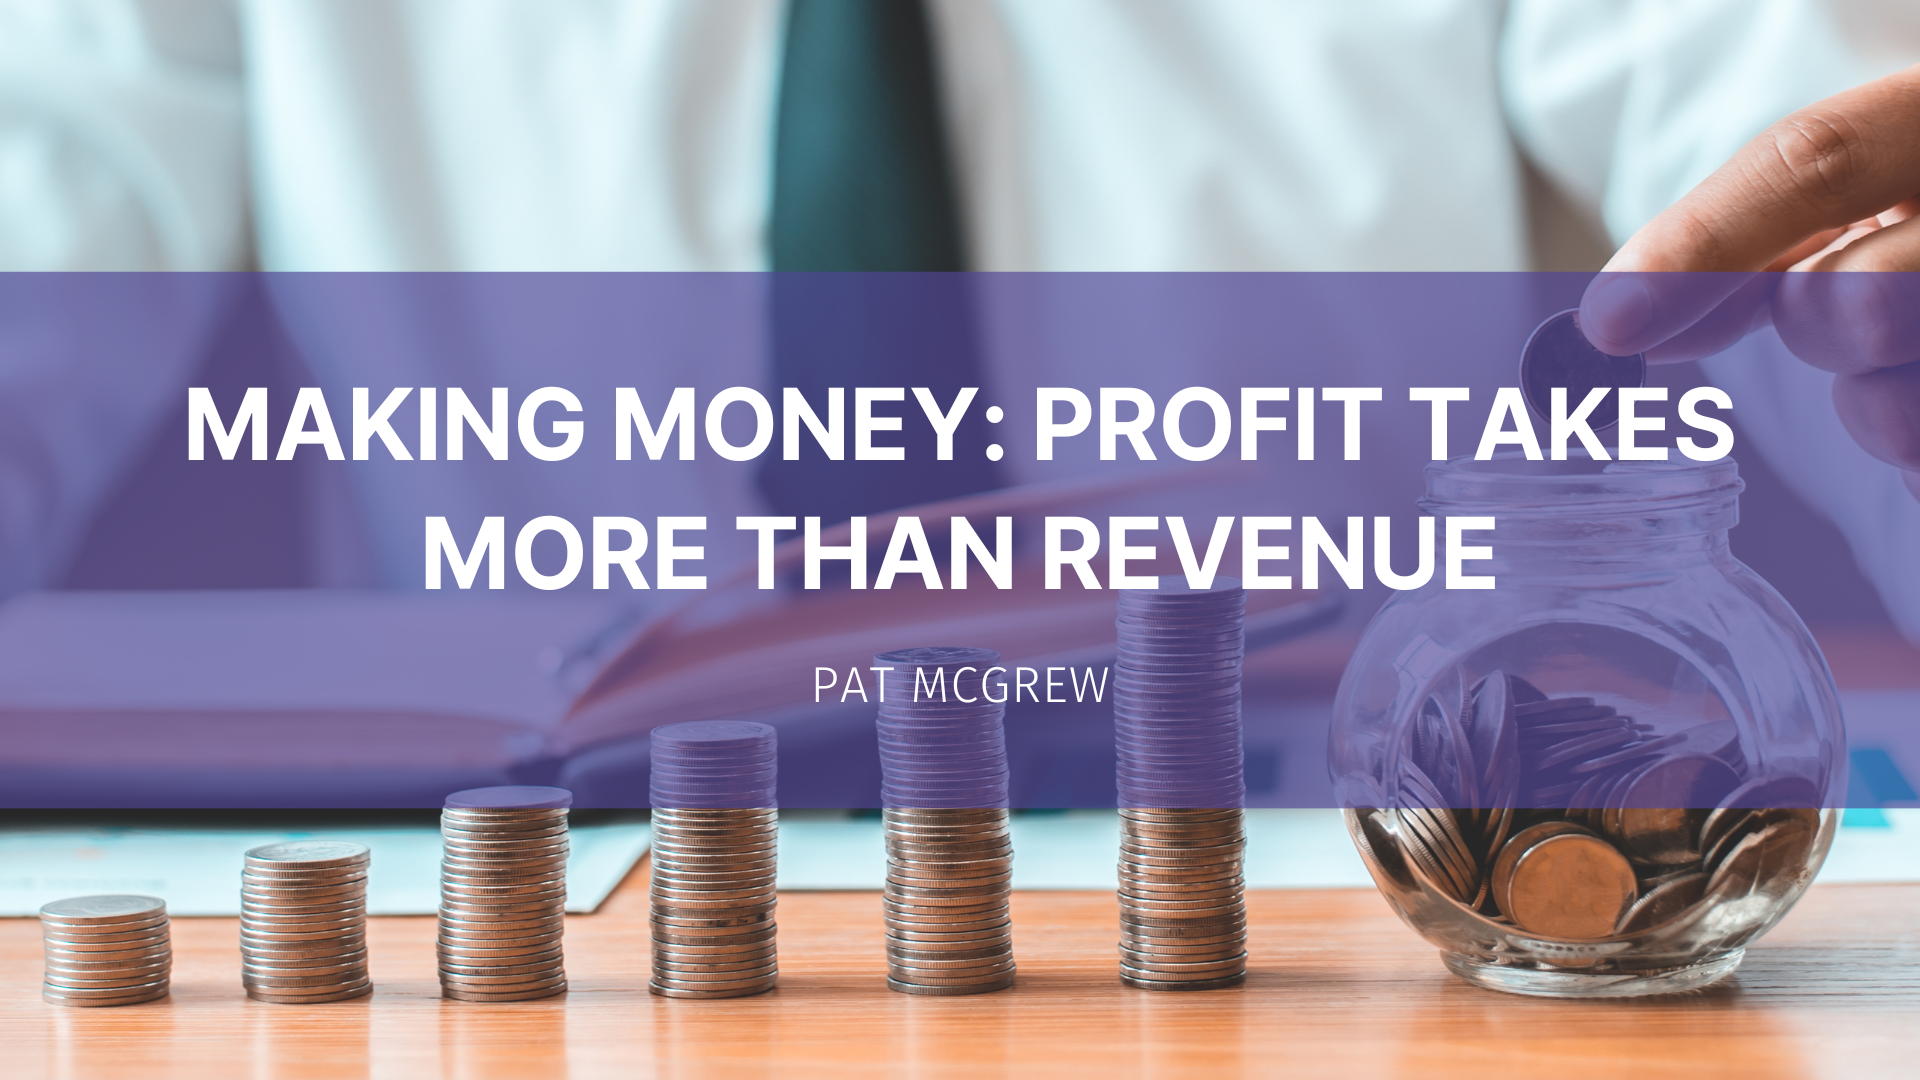 Featured image for “Making Money: Profit Takes More than Revenue”